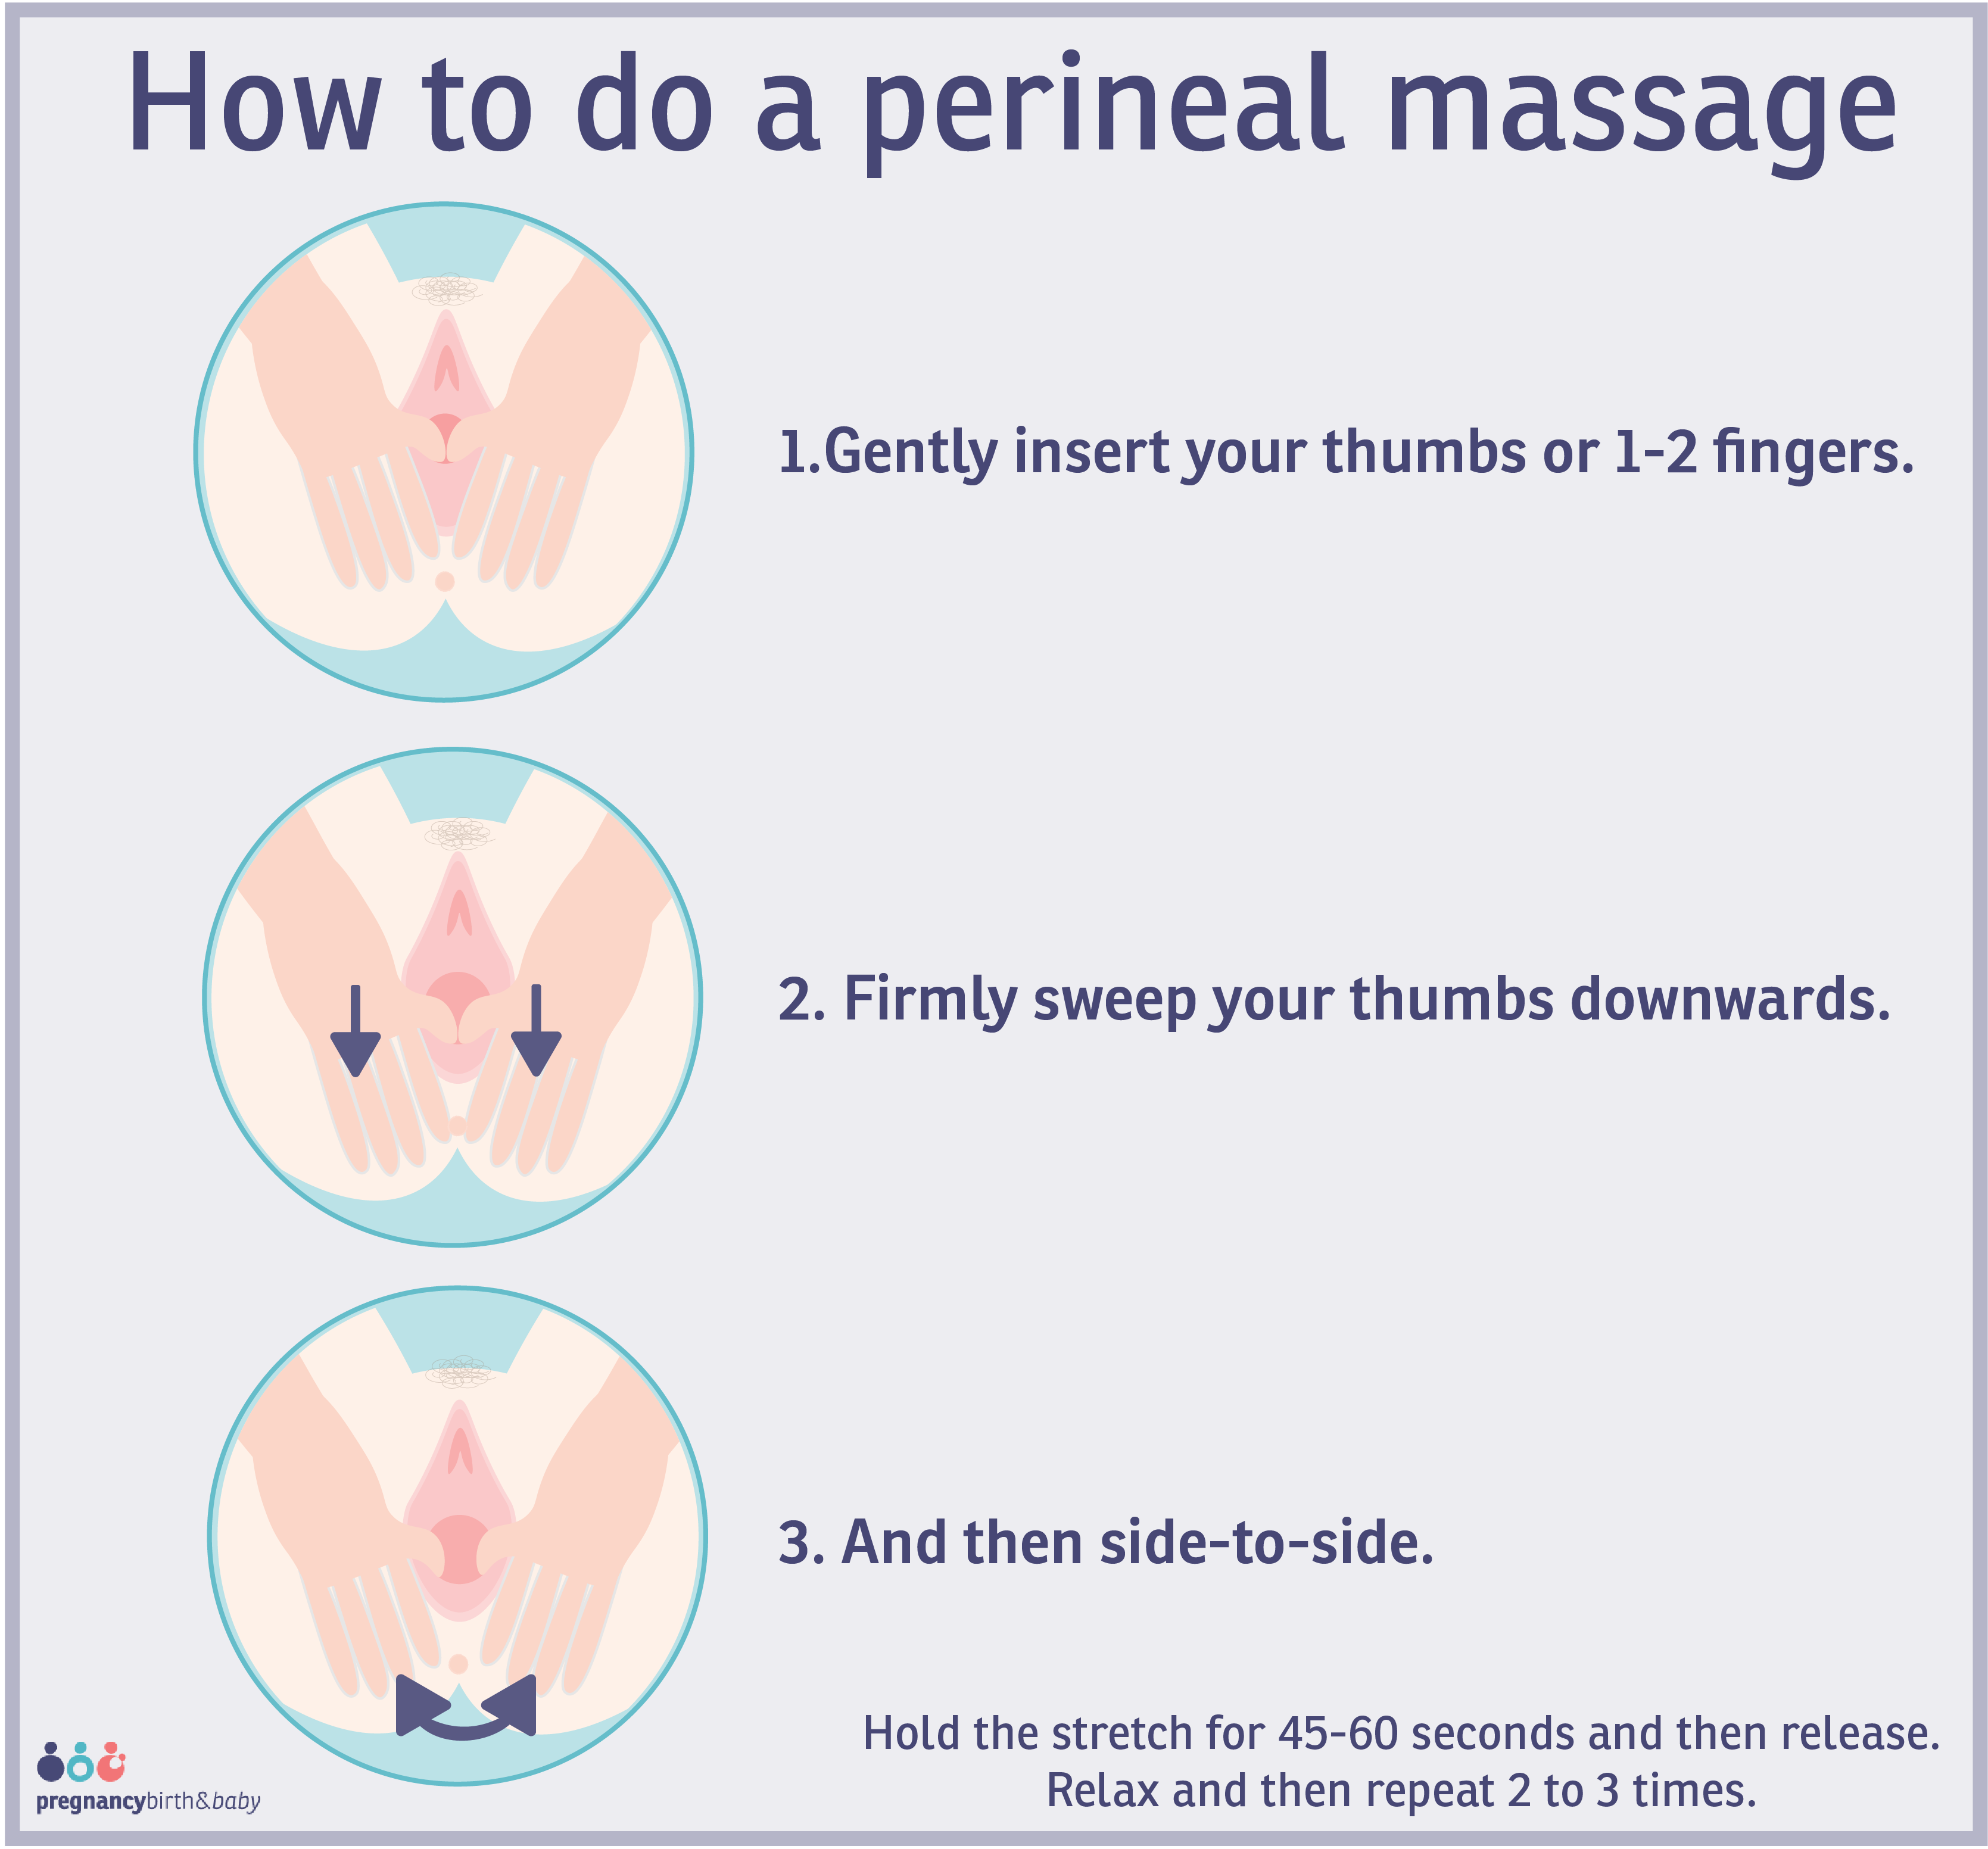 How to do a perineal massage